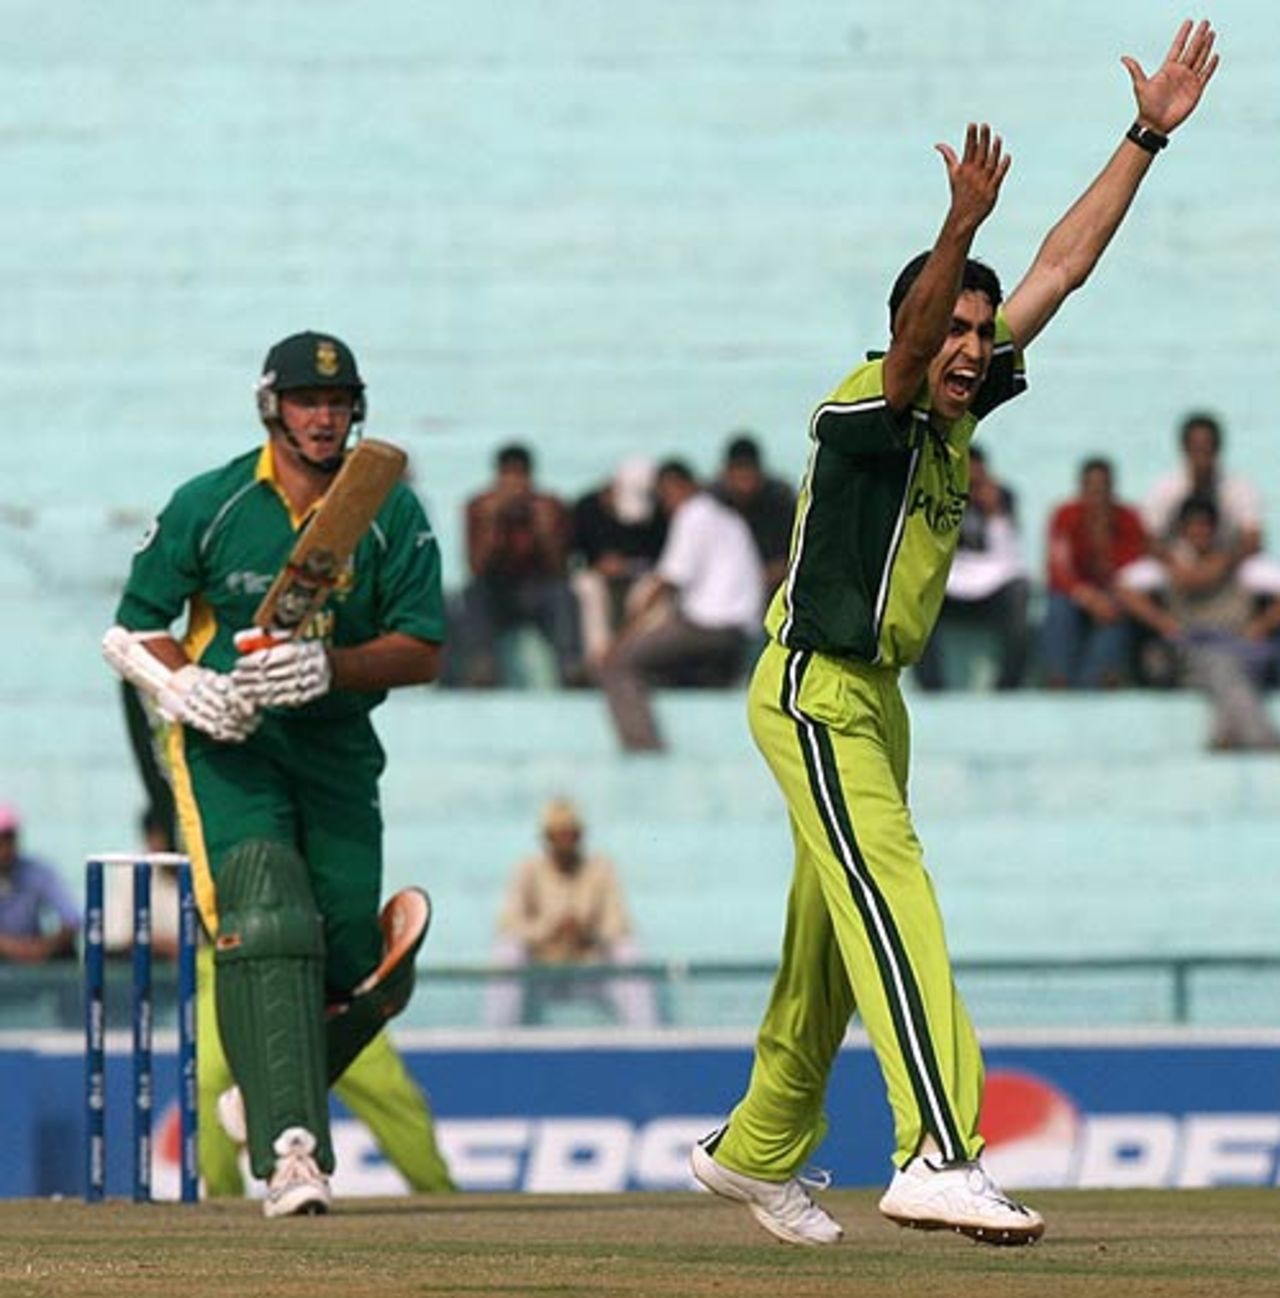 Umar Gul appeals against Graeme Smith, Pakistan v South Africa, Champions Trophy, 16th match, Mohali, October 27, 2006